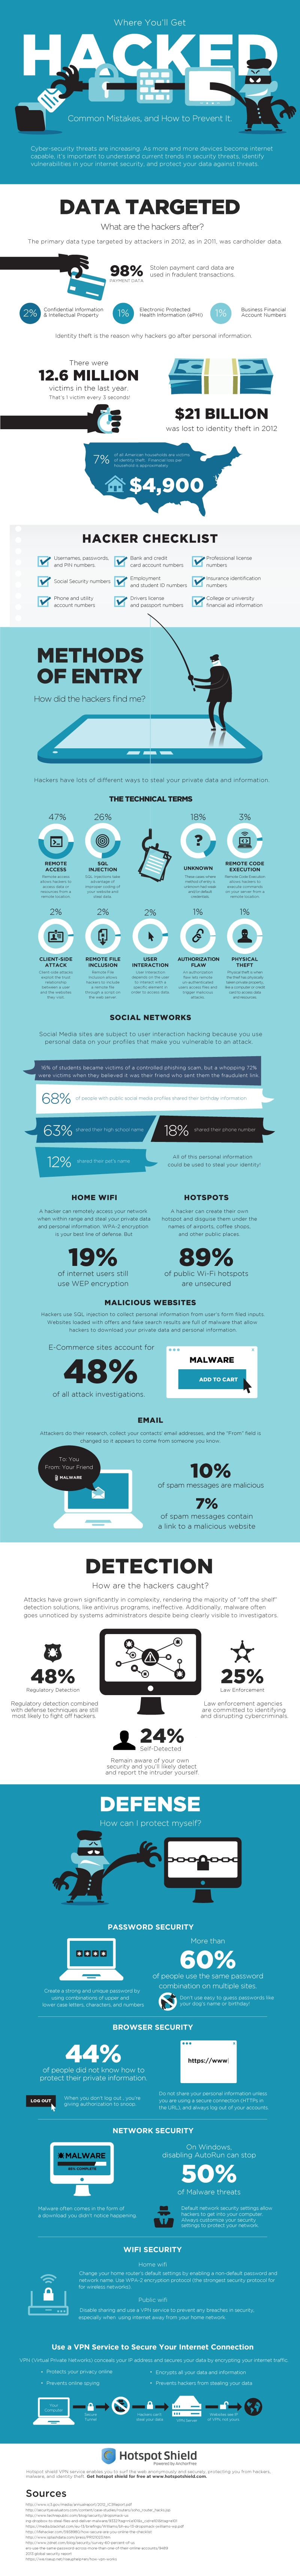 How to protect yourself from hackers [Infographic]